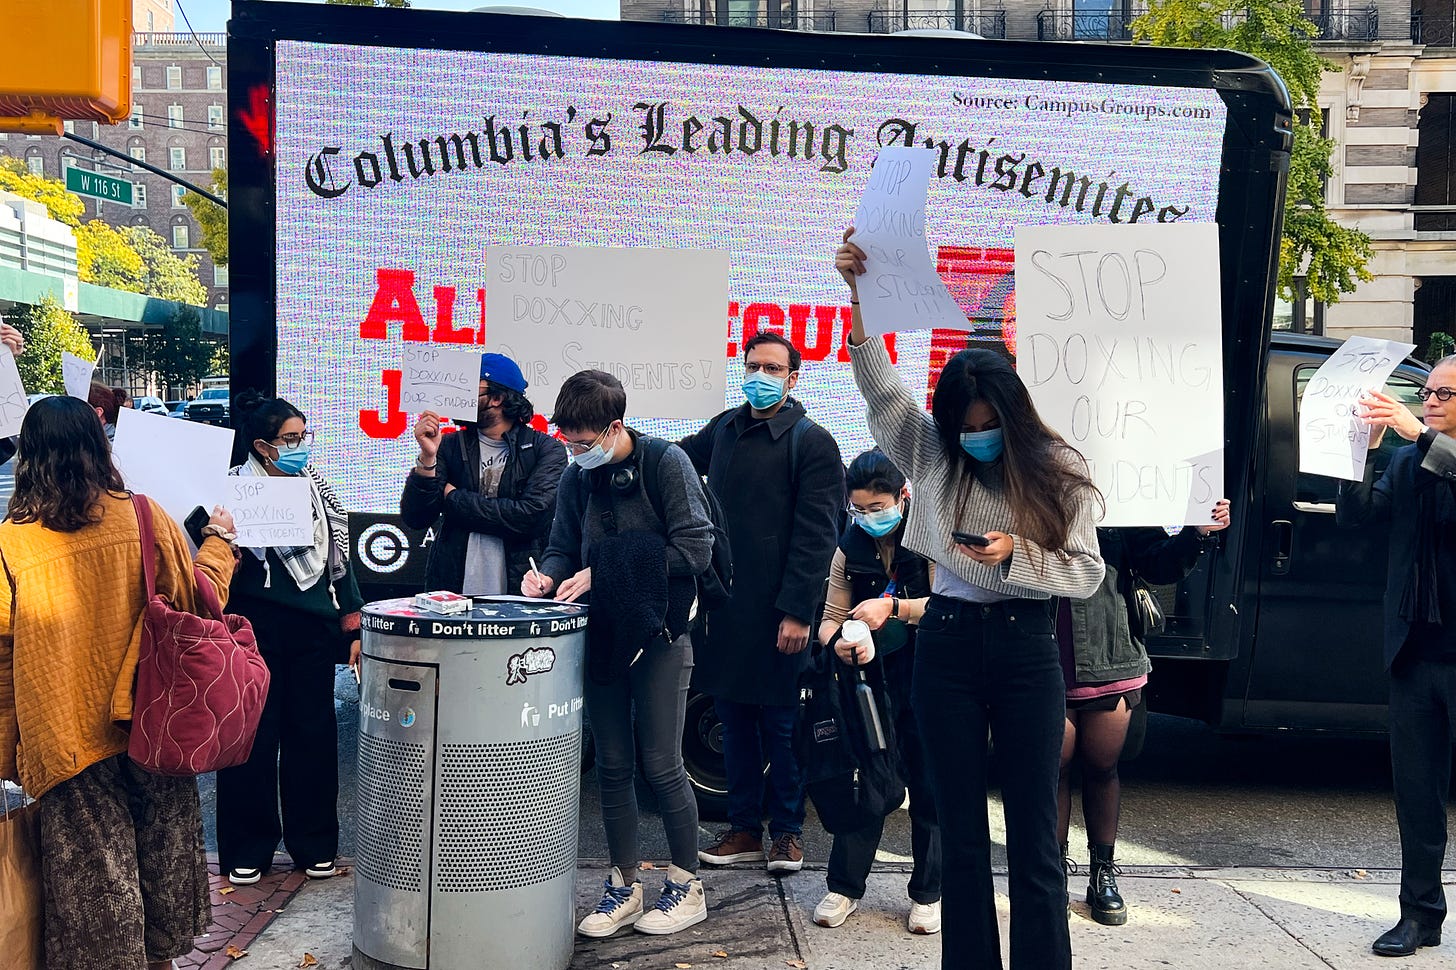 Doxxing truck' displaying names and faces of affiliates it calls  'Antisemites' comes to Columbia